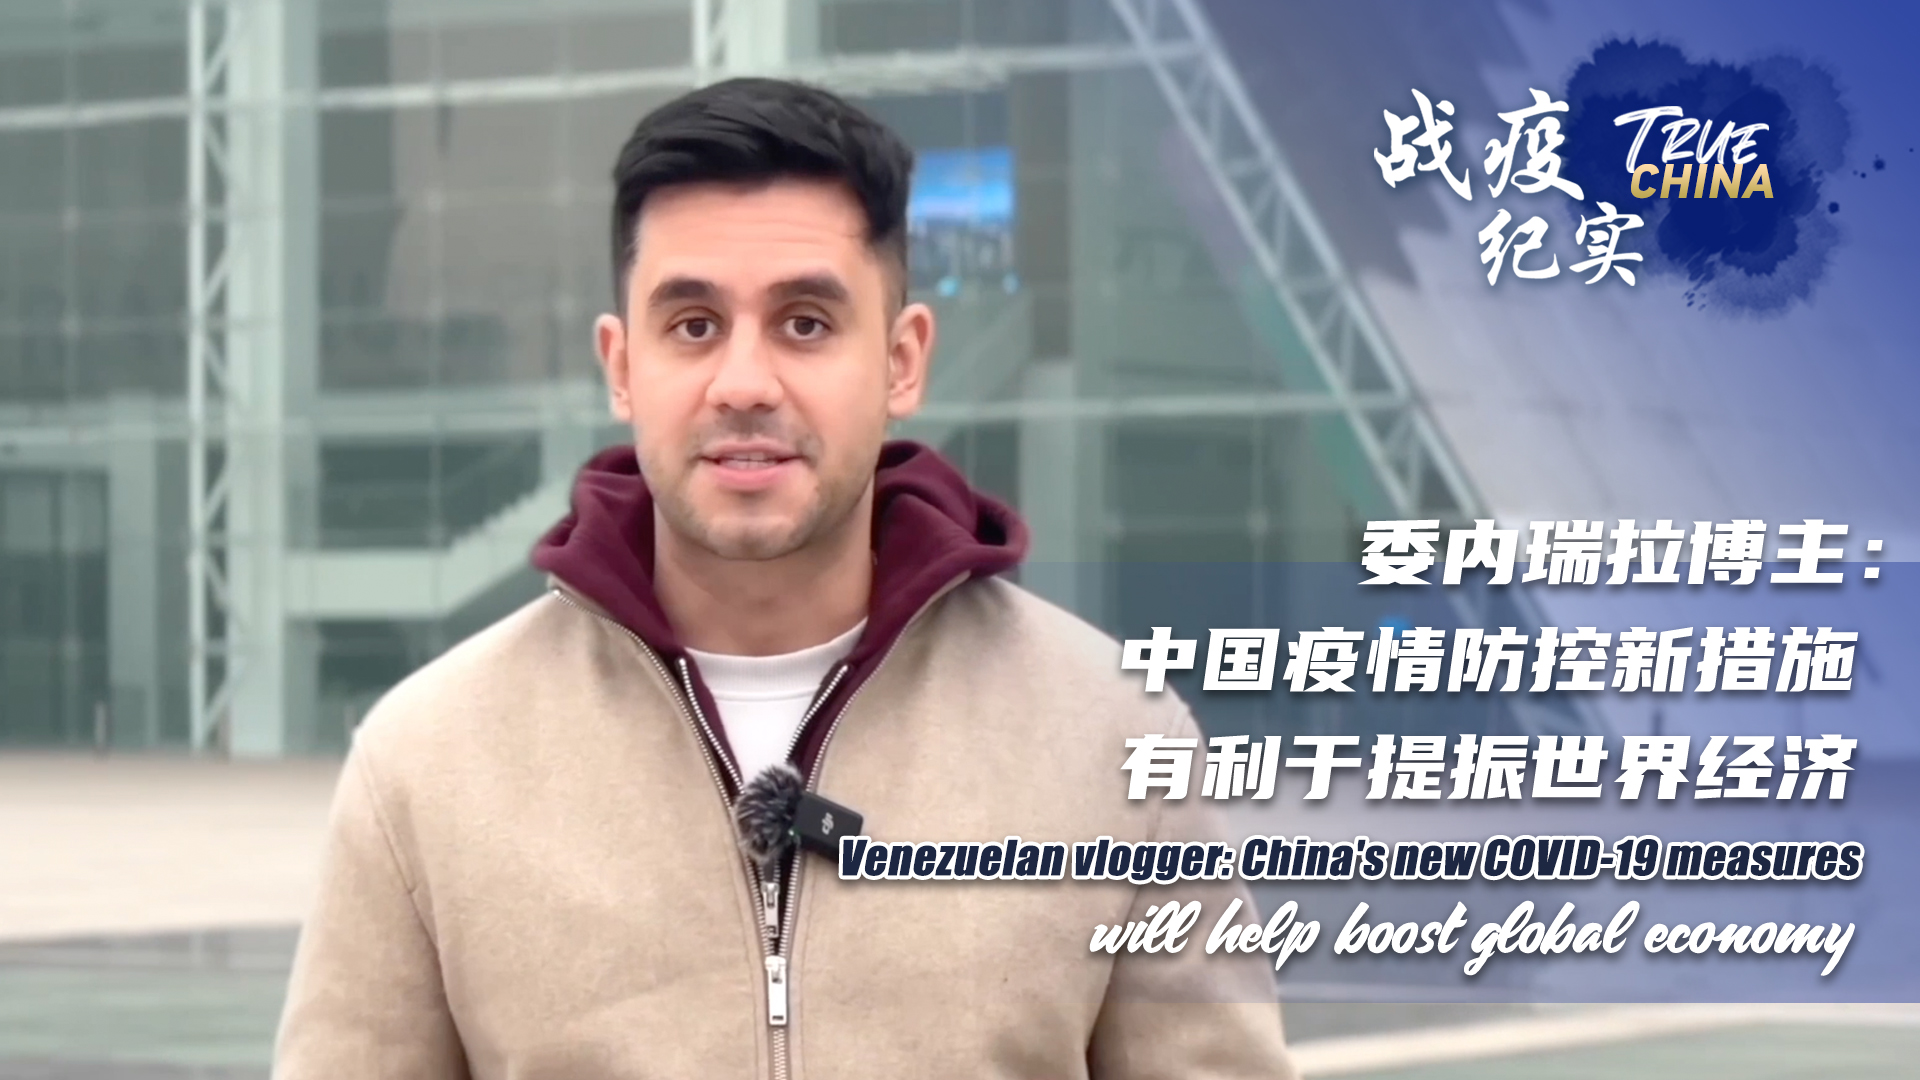 Venezuelan vlogger: China's new COVID policy to boost global economy